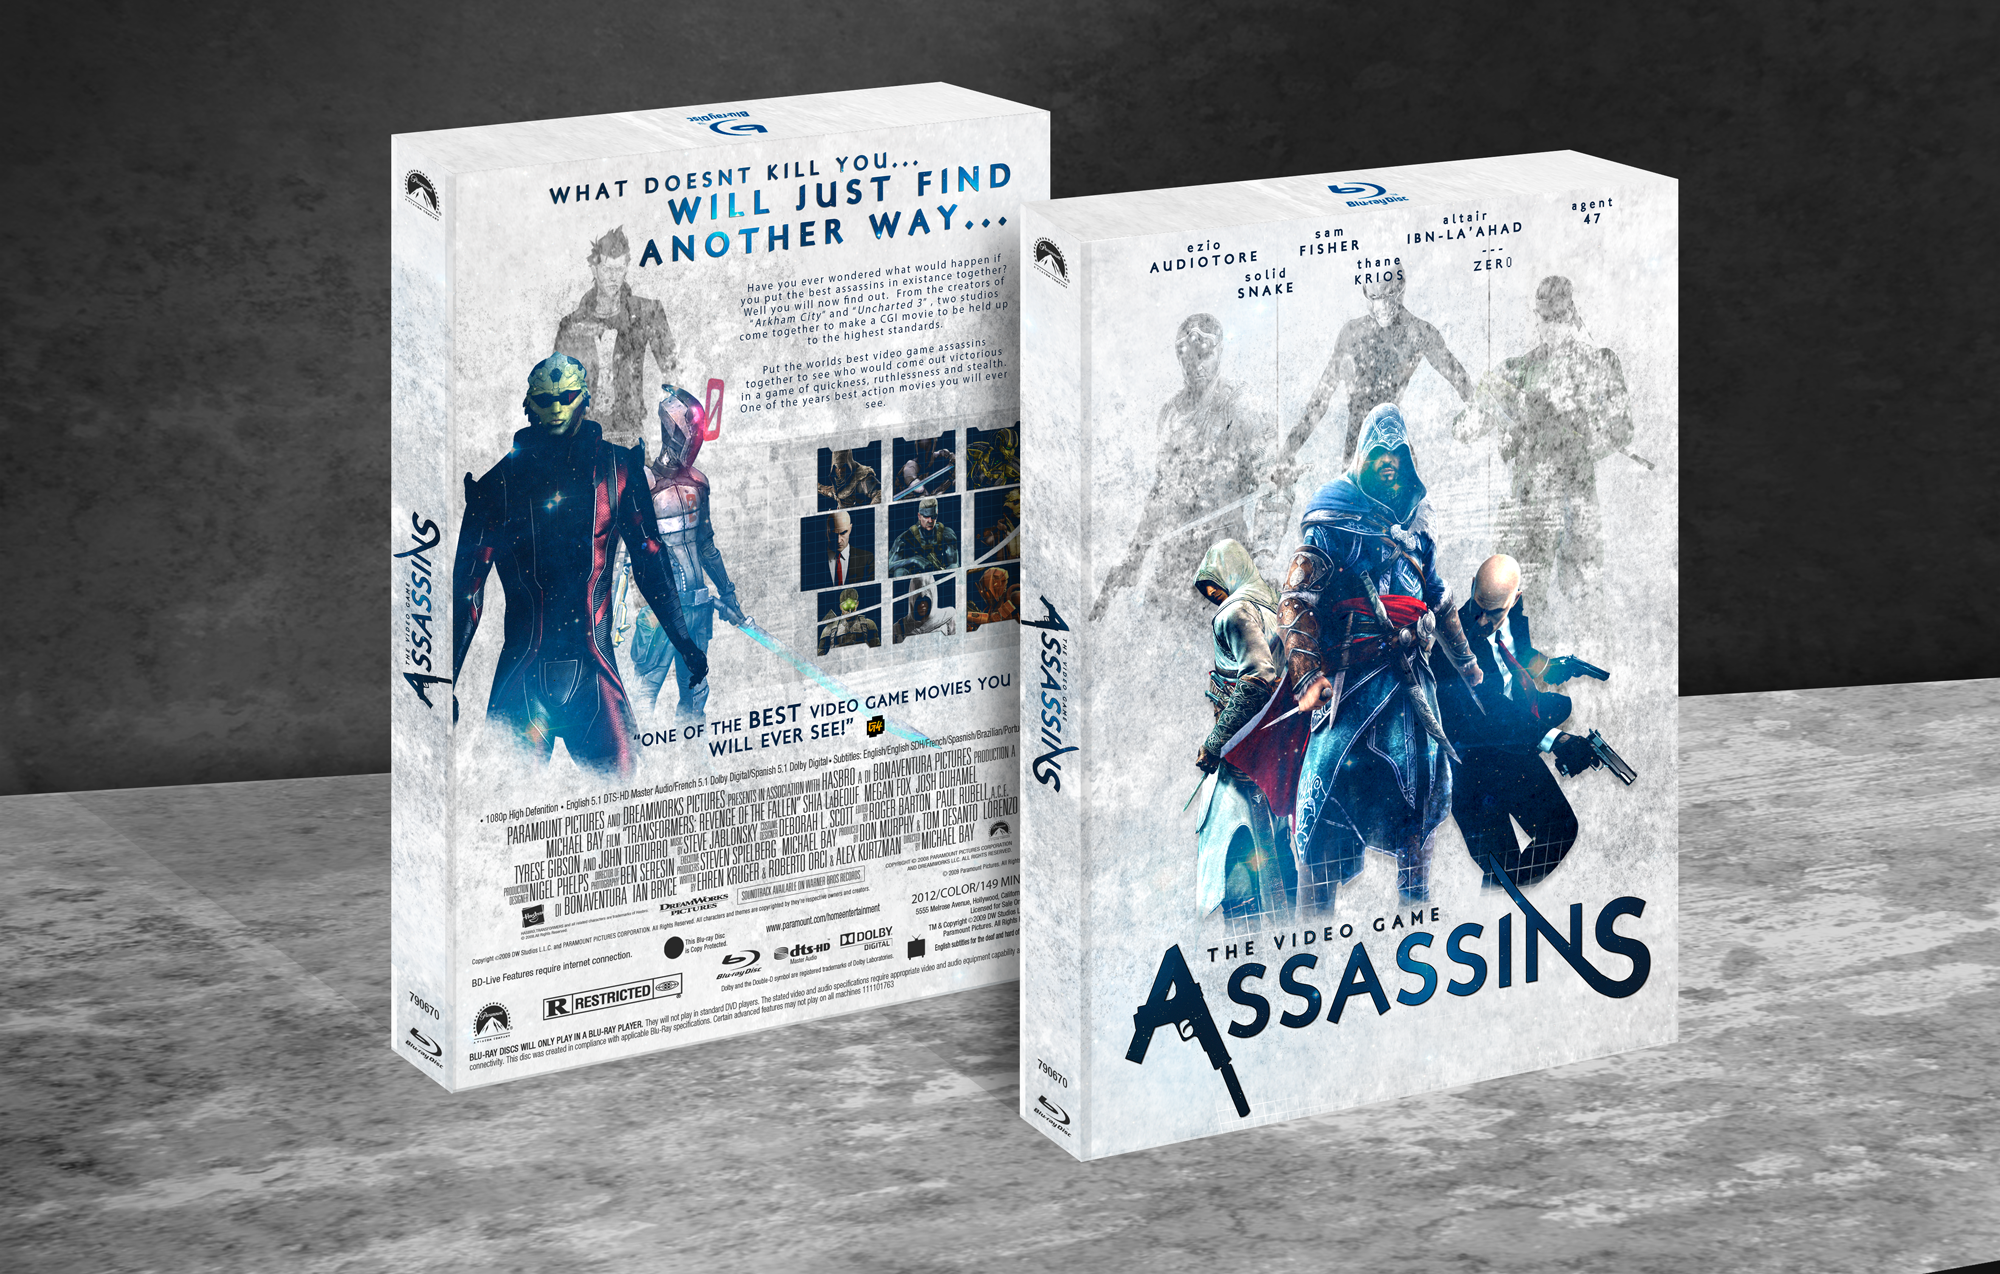 The Video Game Assassins box cover